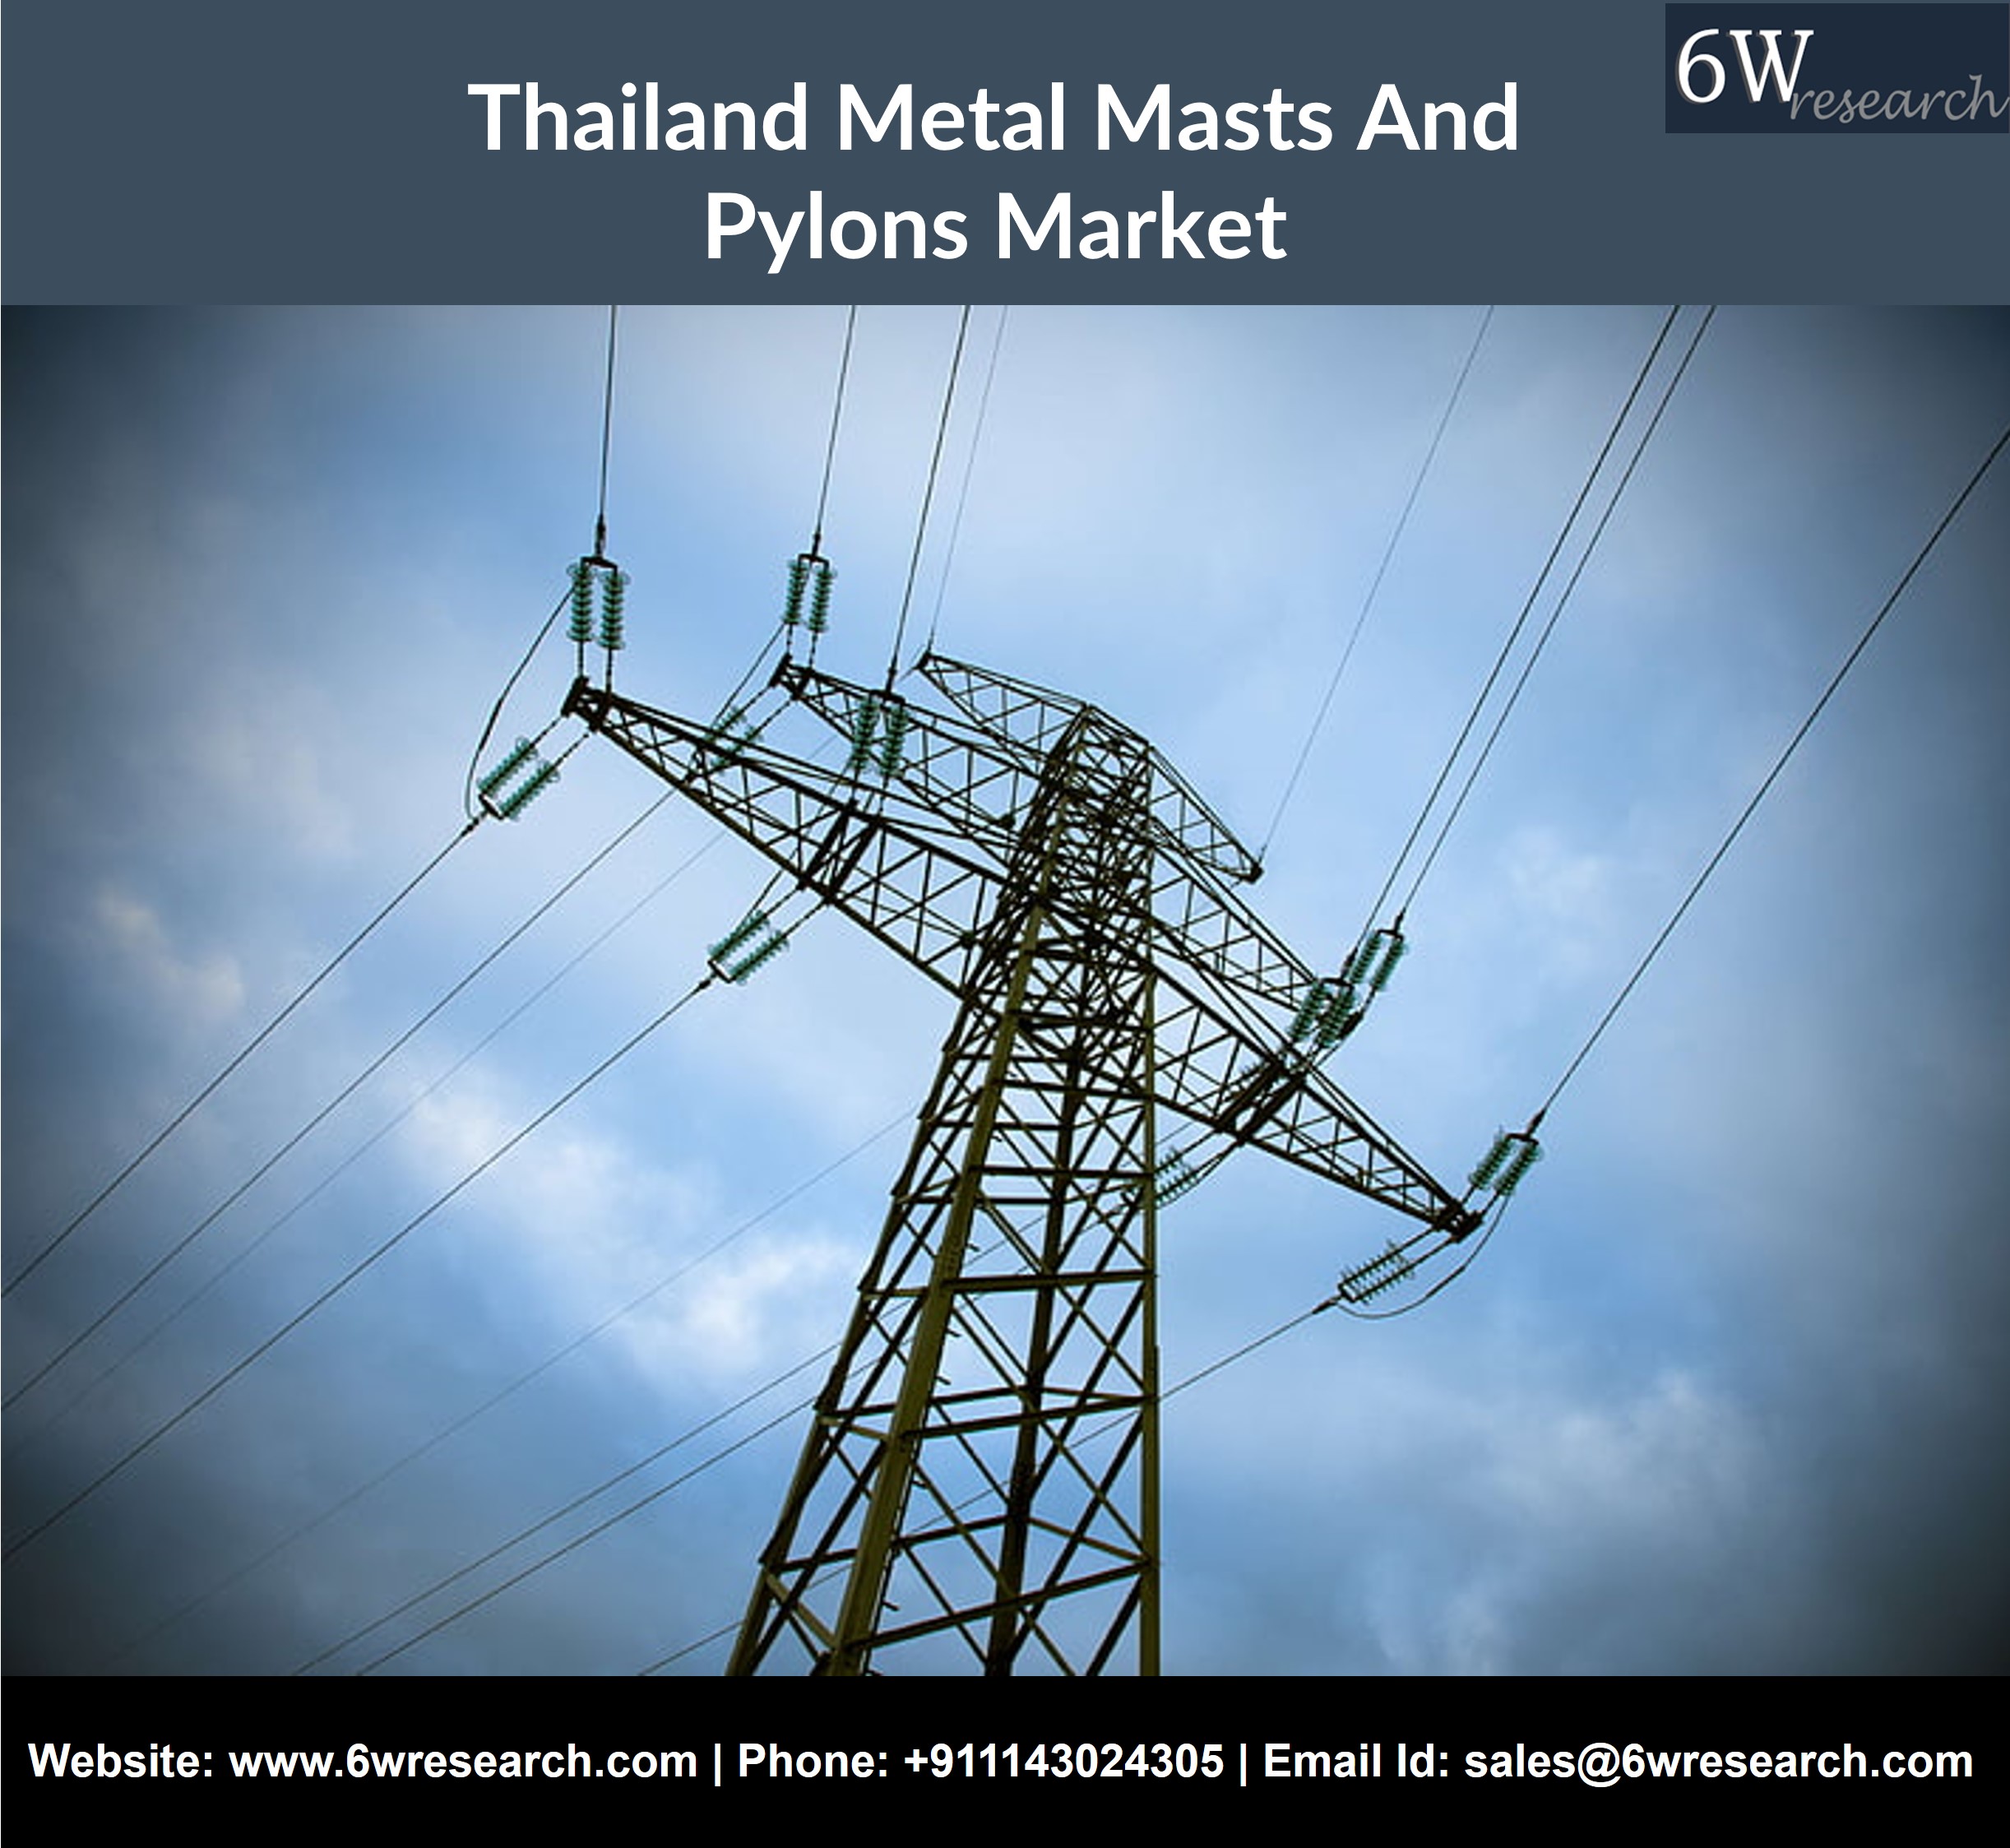 Thailand Metal Masts And Pylons Market (2020-2026) Growth, Trends, Drivers & Challenges – 6Wresearch